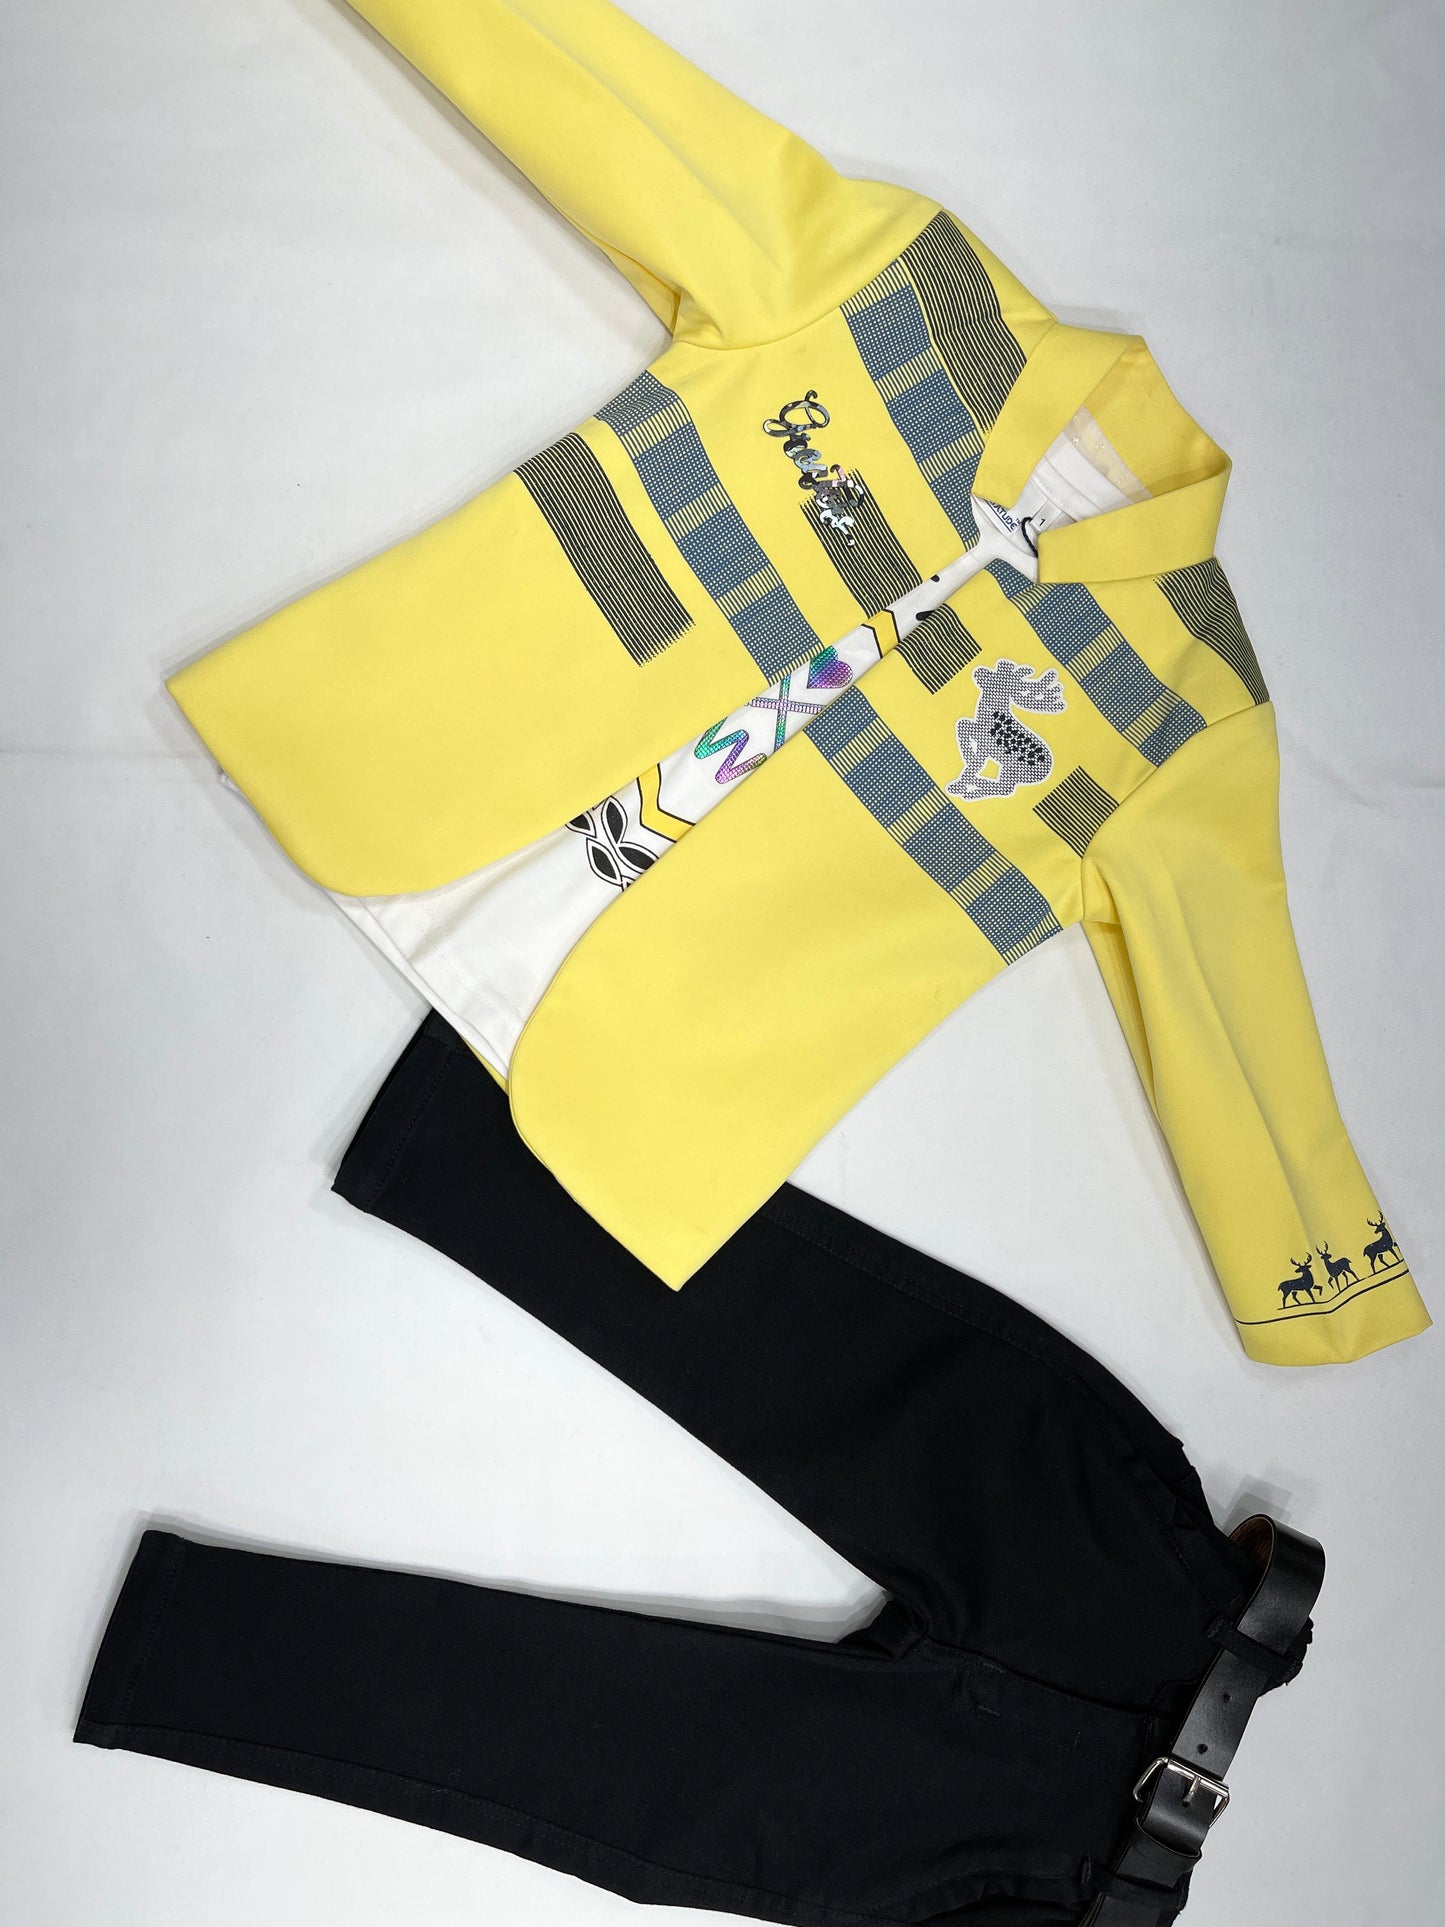 Lemon Open Jacket Blazer Suit with White Printed Tee and Black Pant Boys Set by Gratitude